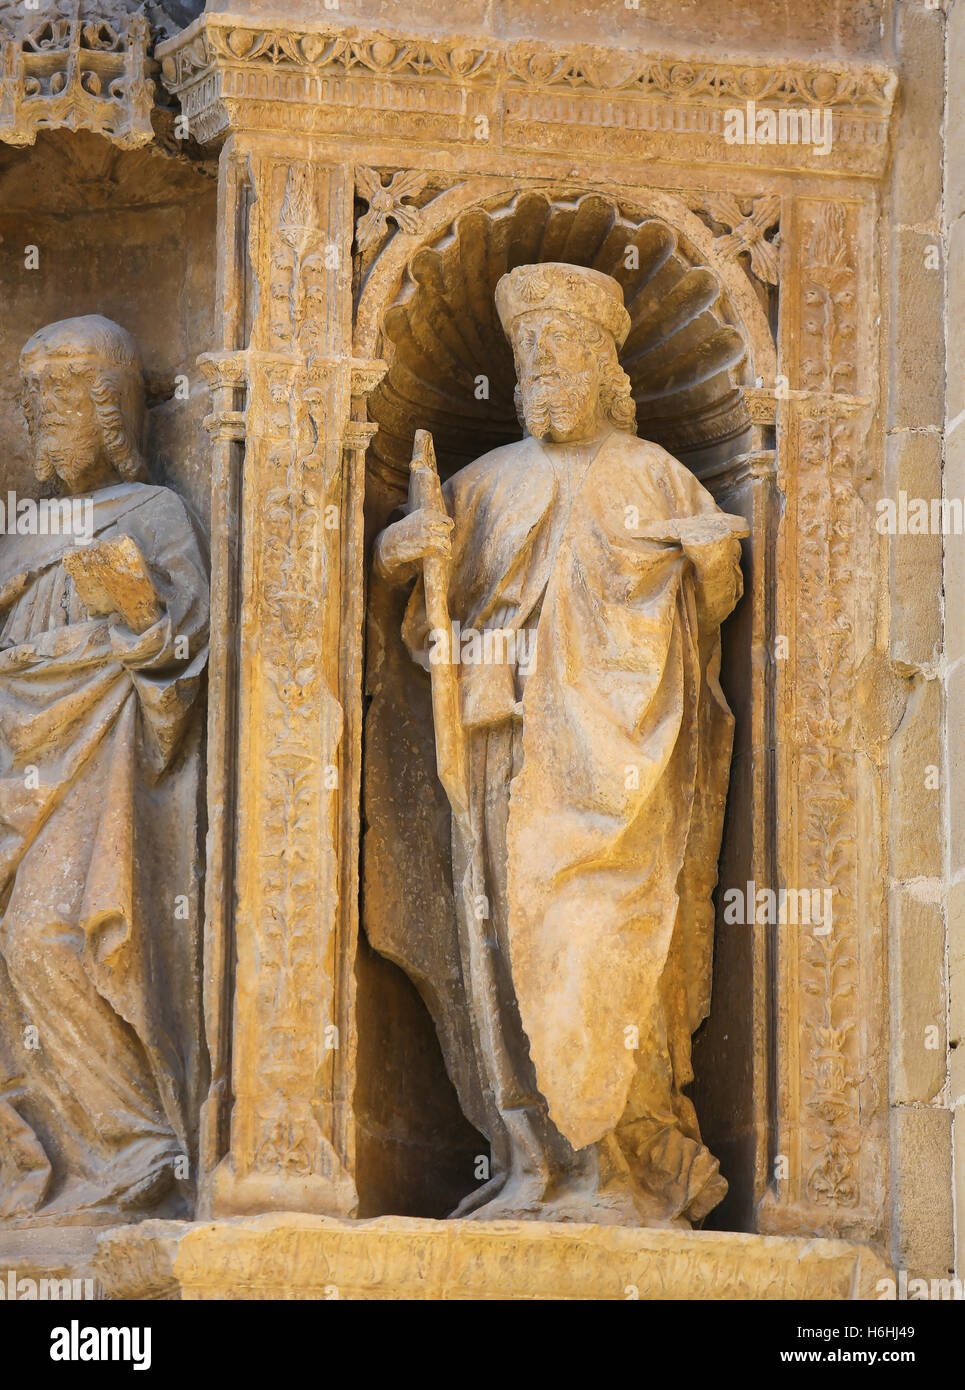 Statue of Saint James the Greater, one of the Apostles, at the16th Century Principal Gate at the Church of Santo Tomas in Haro, Stock Photo